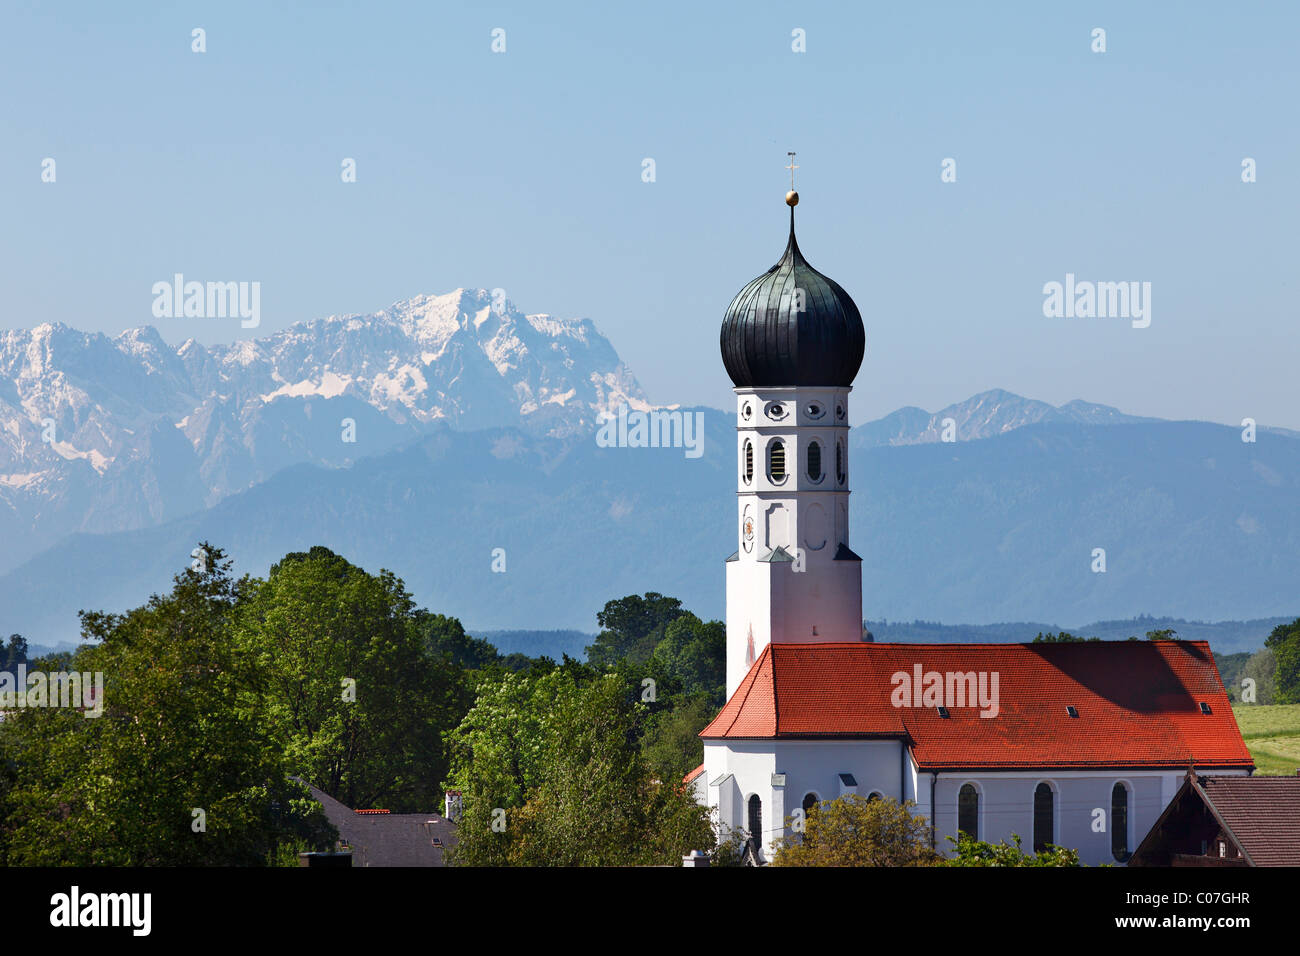 Church in Muensing, in the back Mt. Zugspitze, Fuenfseenland or Five Lakes region, Upper Bavaria, Bavaria, Germany, Europe Stock Photo